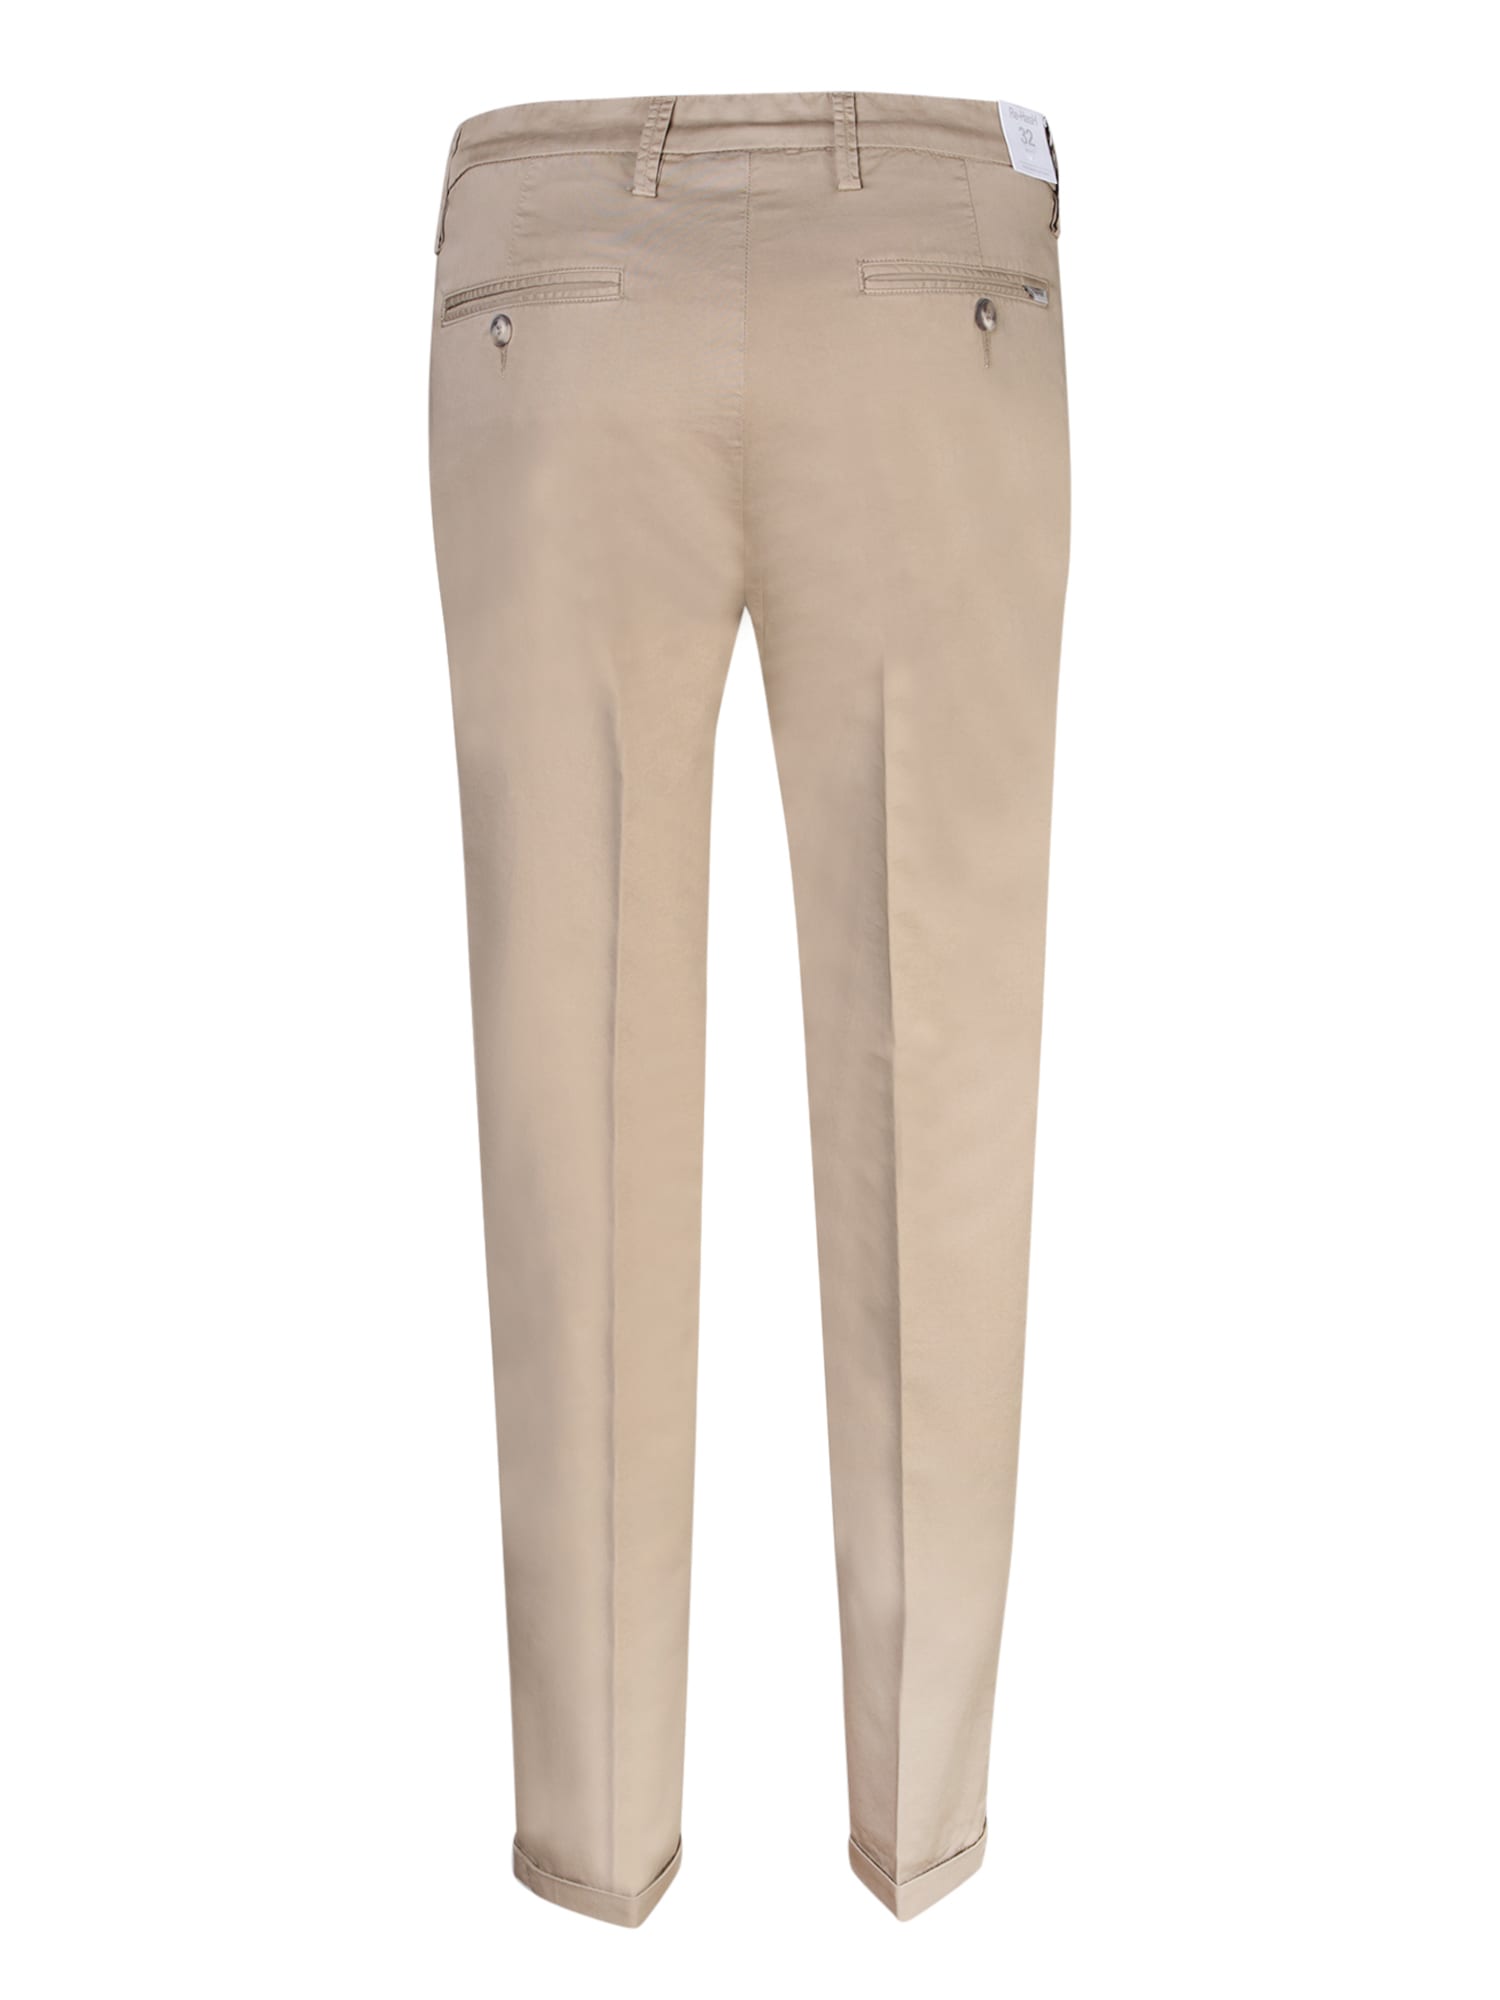 Shop Re-hash Mucha Cotton Brown Trousers